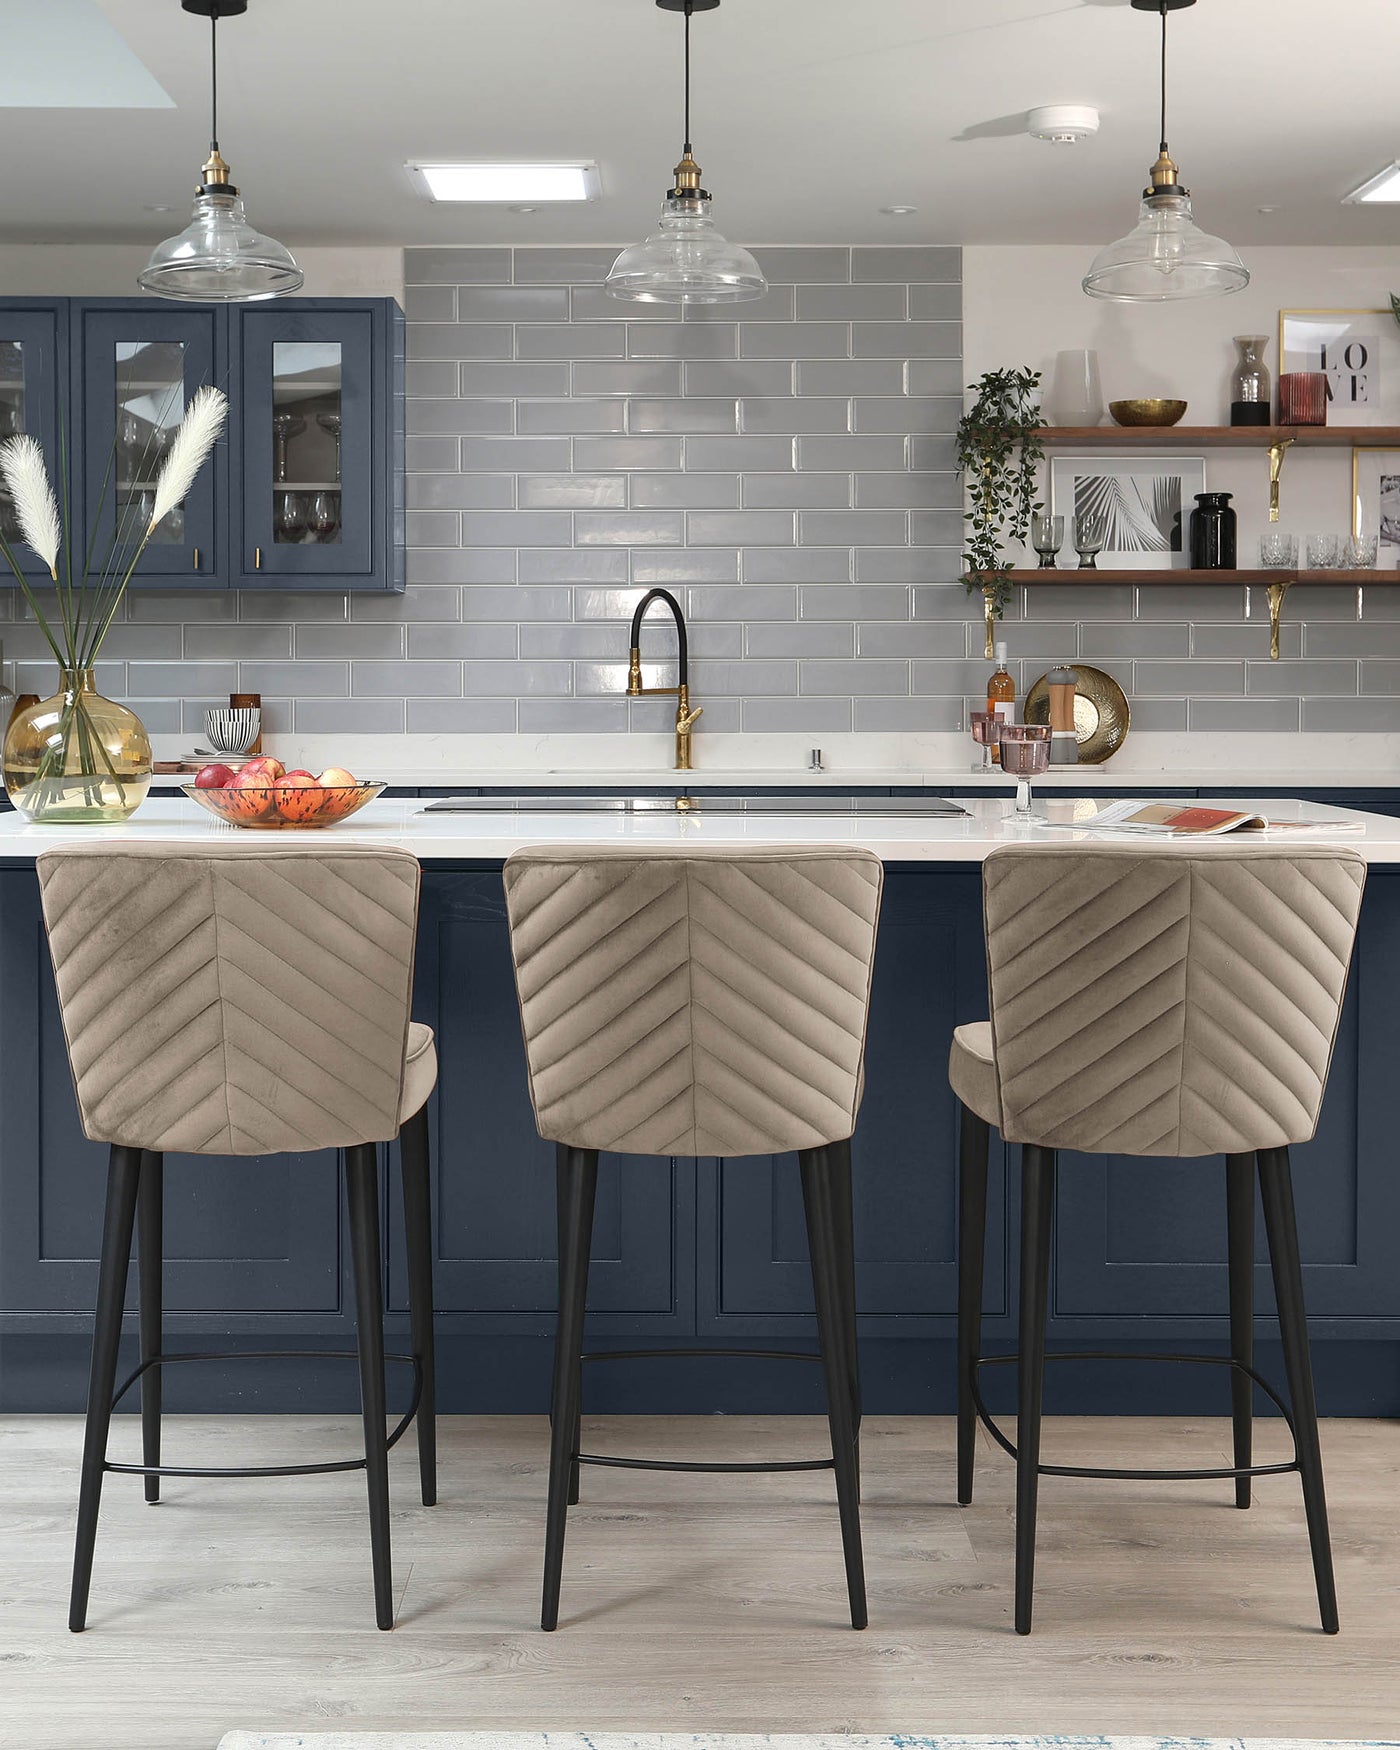 Three contemporary bar stools with upholstered seats in a light, textured fabric and chevron stitching. They feature curved backrests and slender black metal legs with footrests, positioned at a kitchen island.